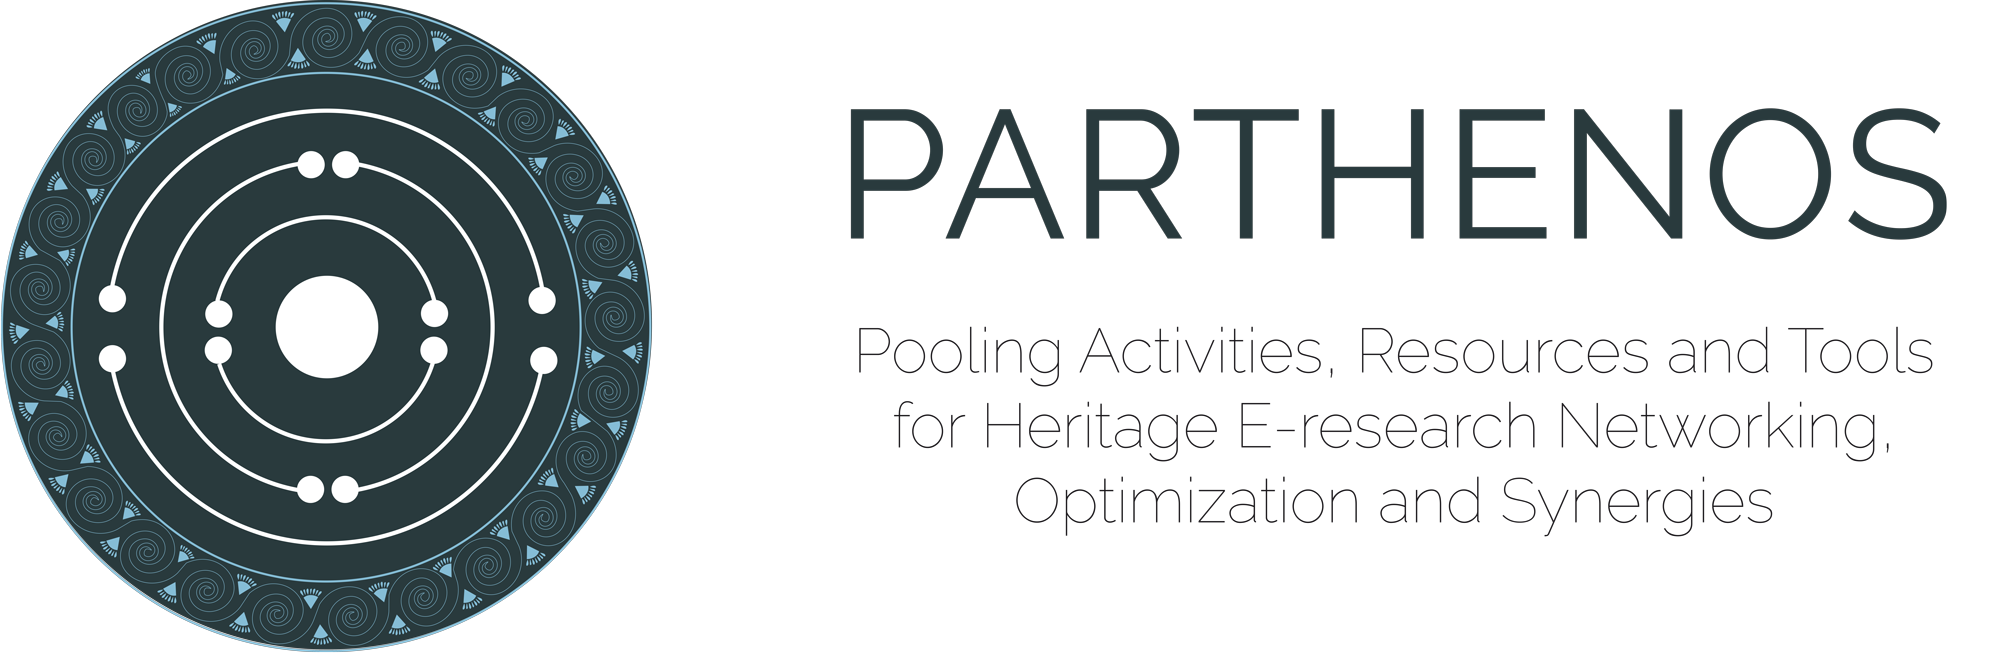 PARTHENOS training survey: Embedding Research Infrastructures into Higher Education Curricula